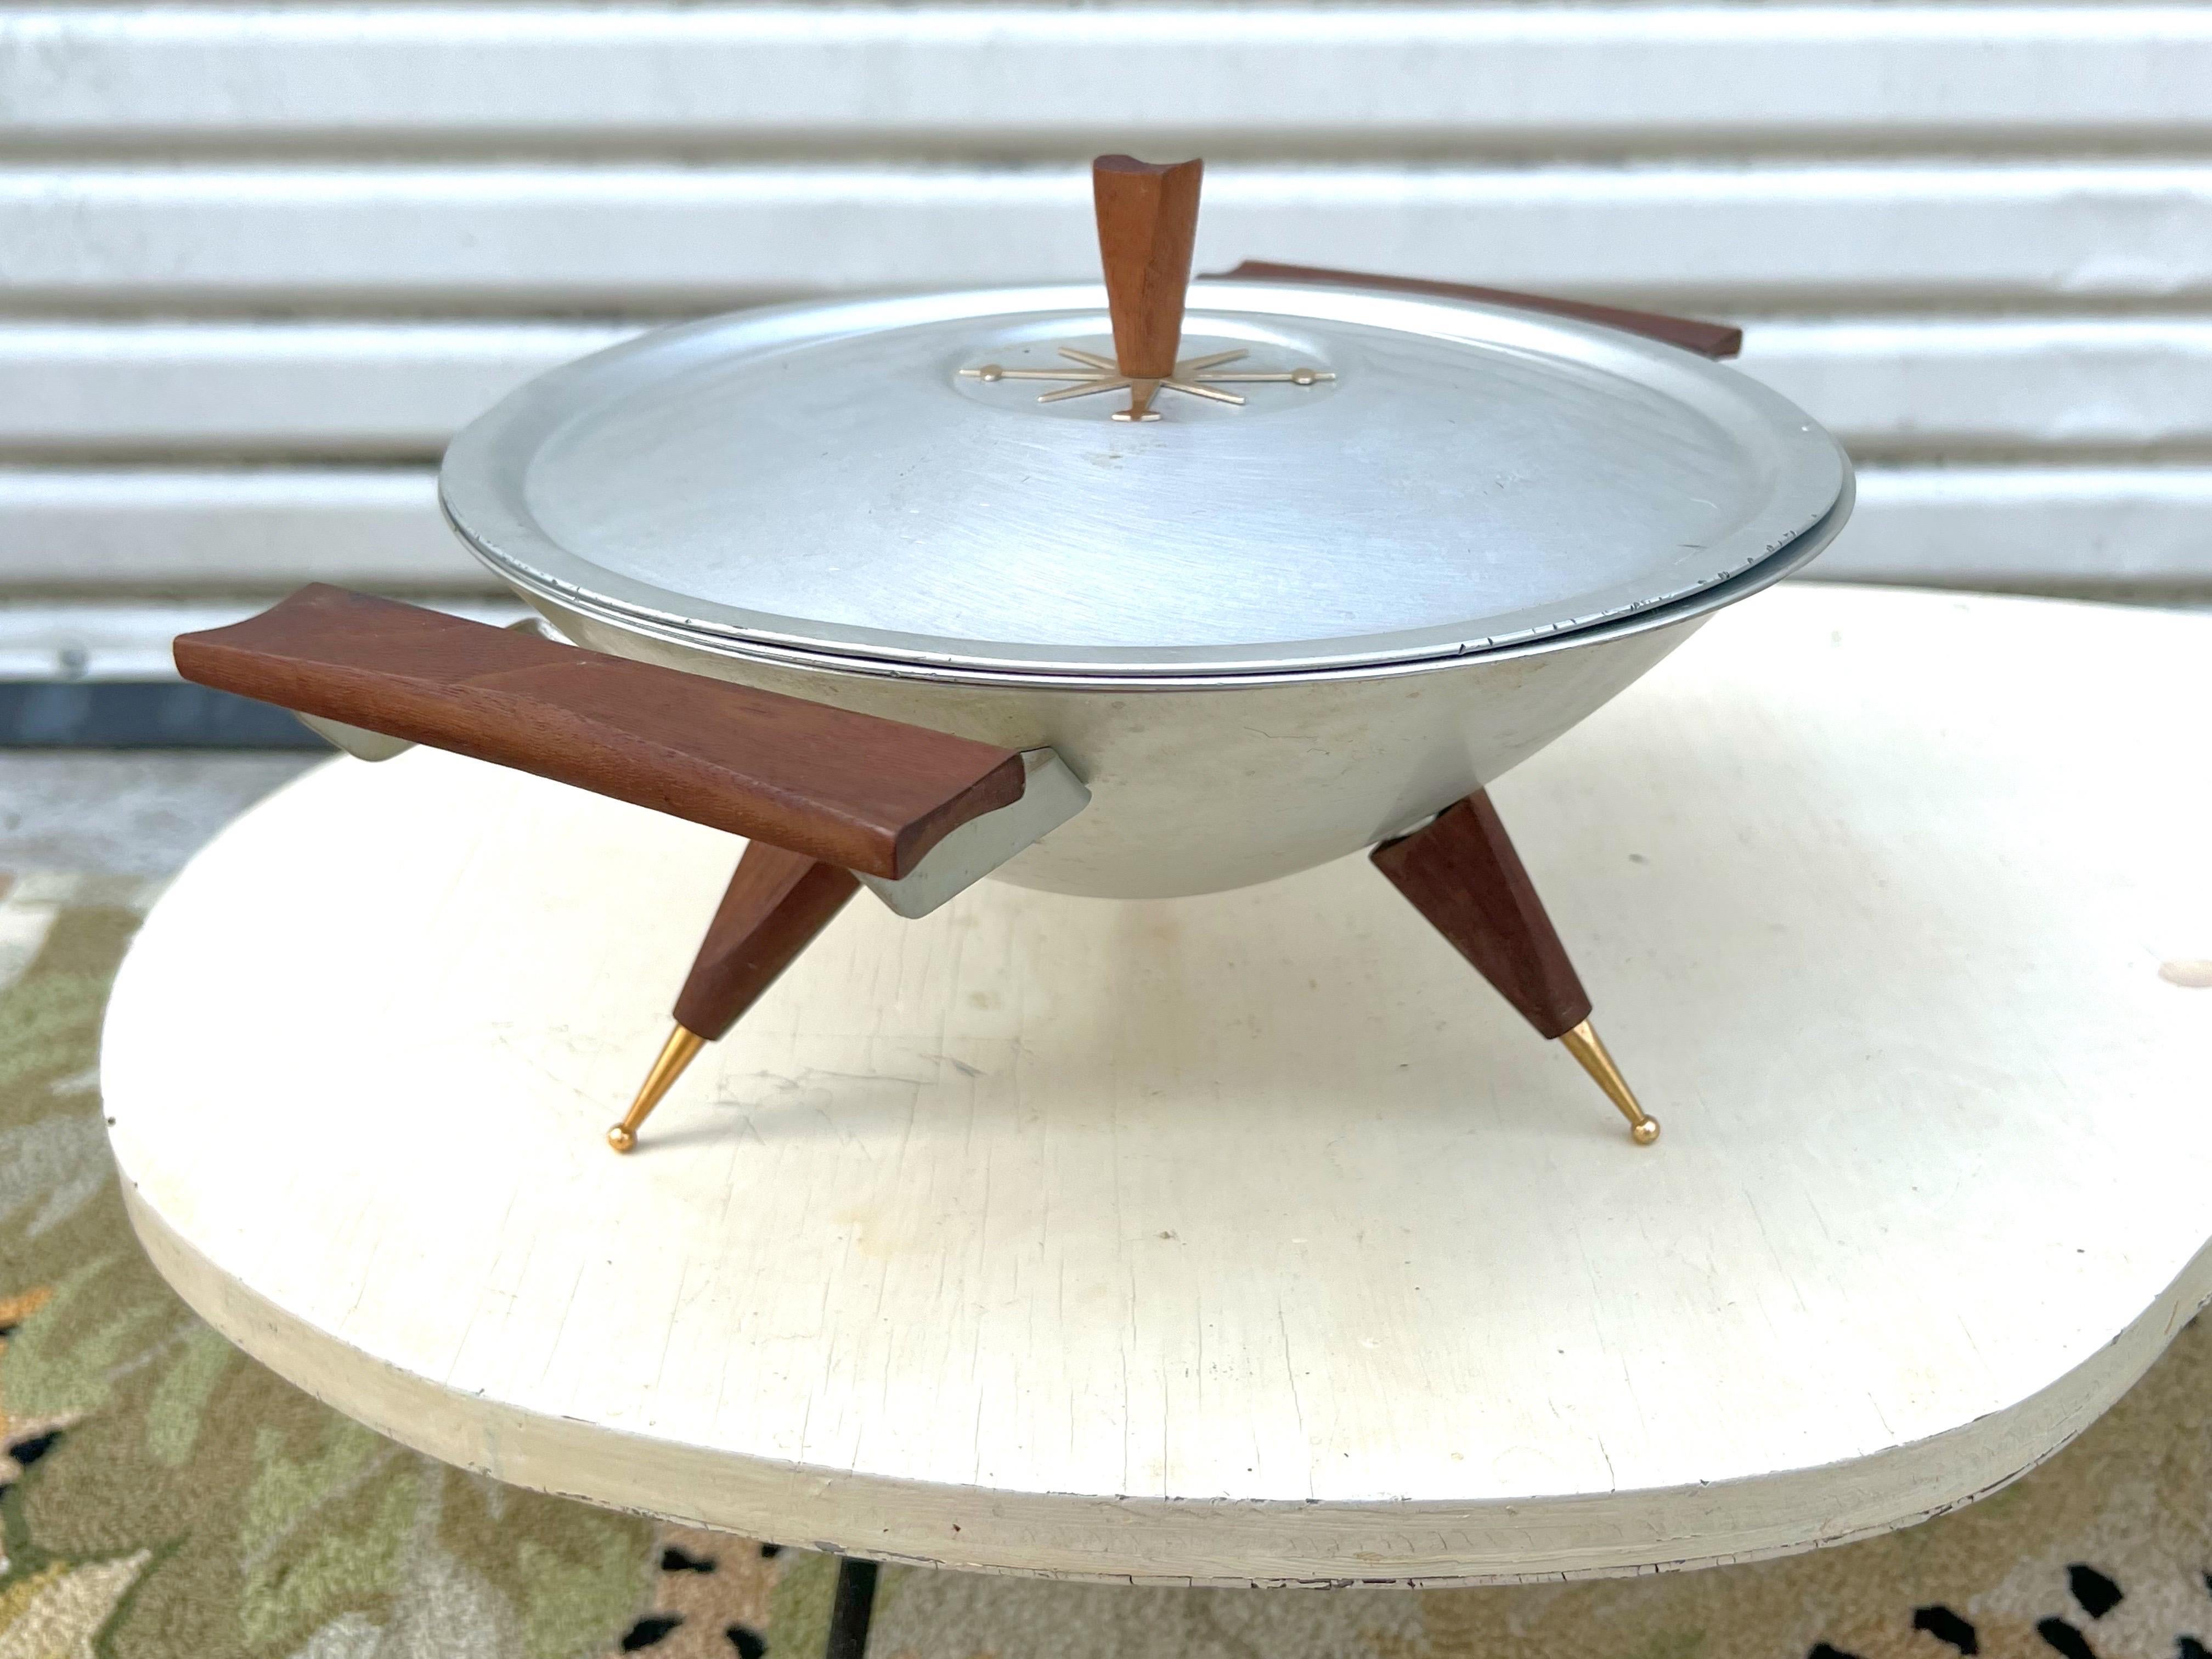 Jetsons for dinner. Aluminum and wood. Three pieces: bowl, lid, base. All nearly mint.   The wood and gold areas are in excellent condition. It would be a great serving piece for entertaining at parties or a decorative element in a room.